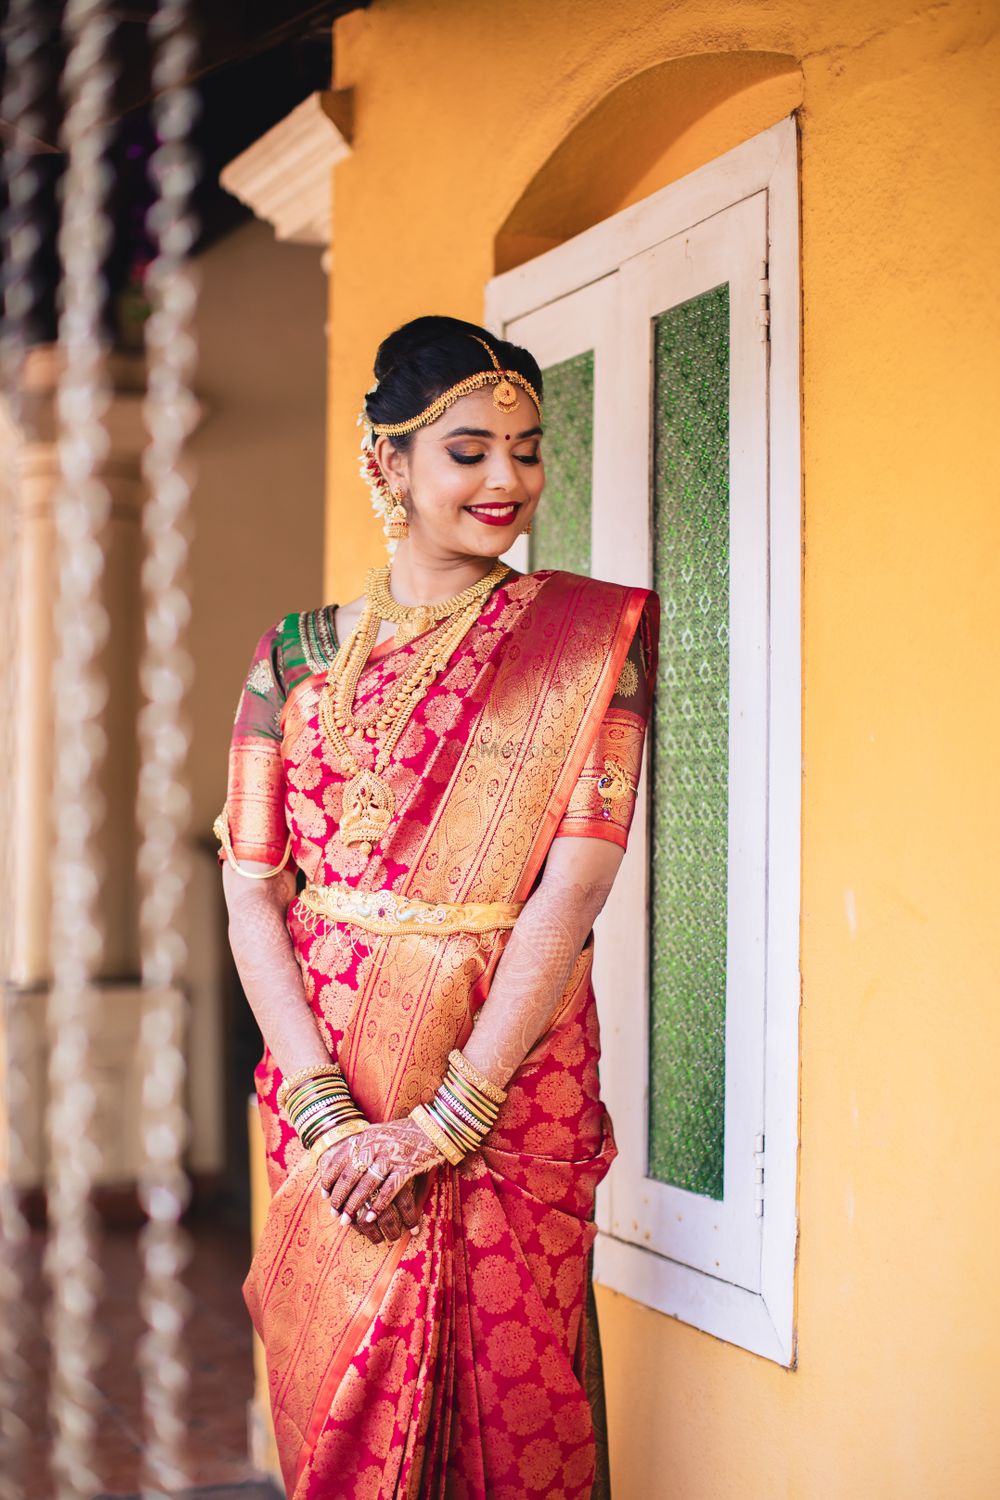 Photo of A south Indian bride in a kanjeevaram saree and gold jewelry for her wedding day